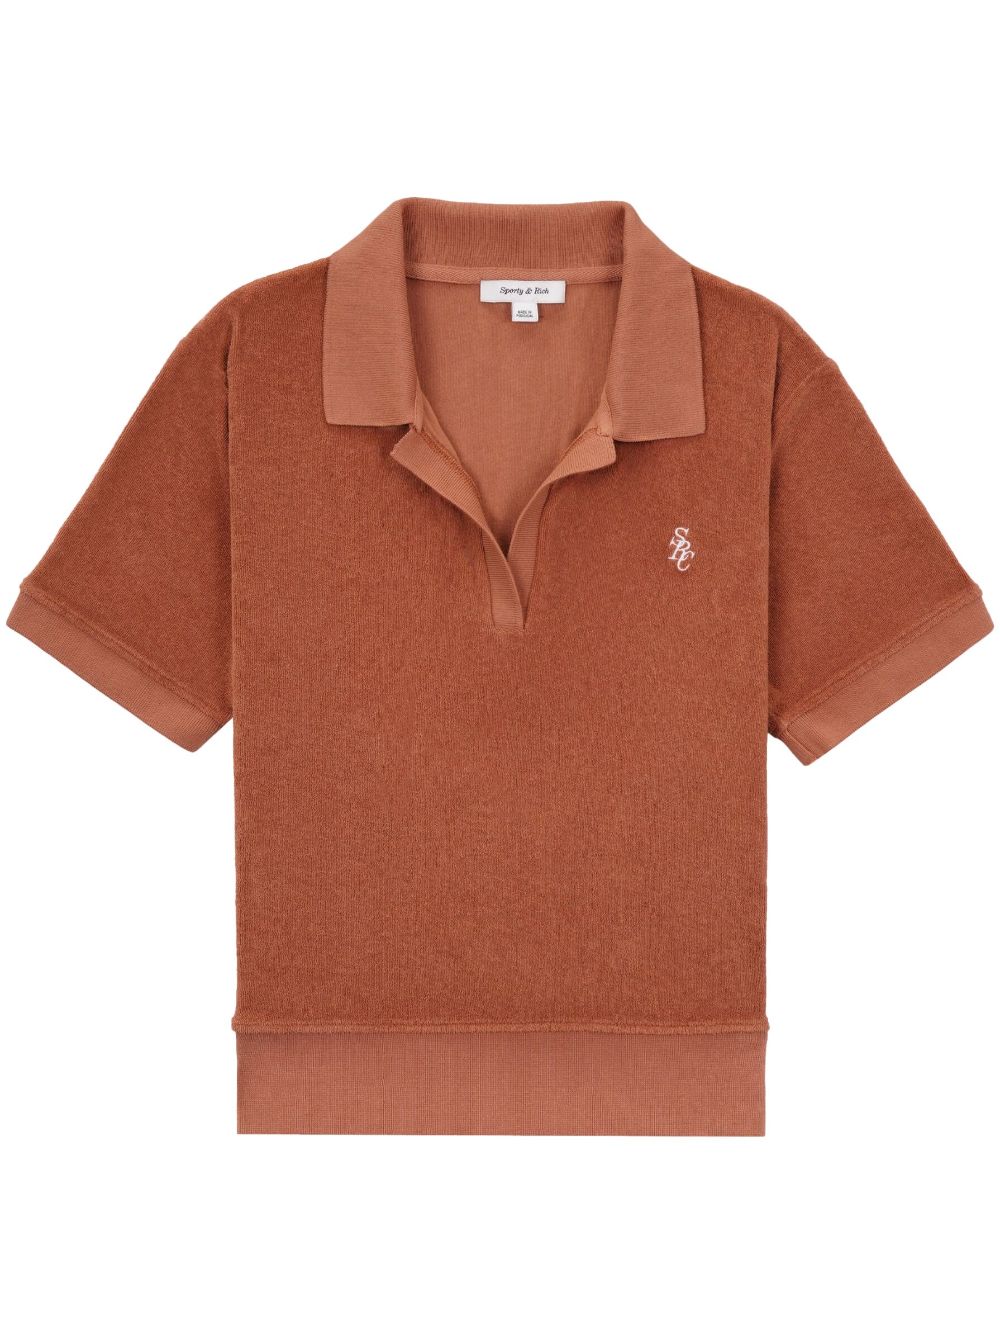 Image 1 of Sporty & Rich embroidered-logo polo shirt